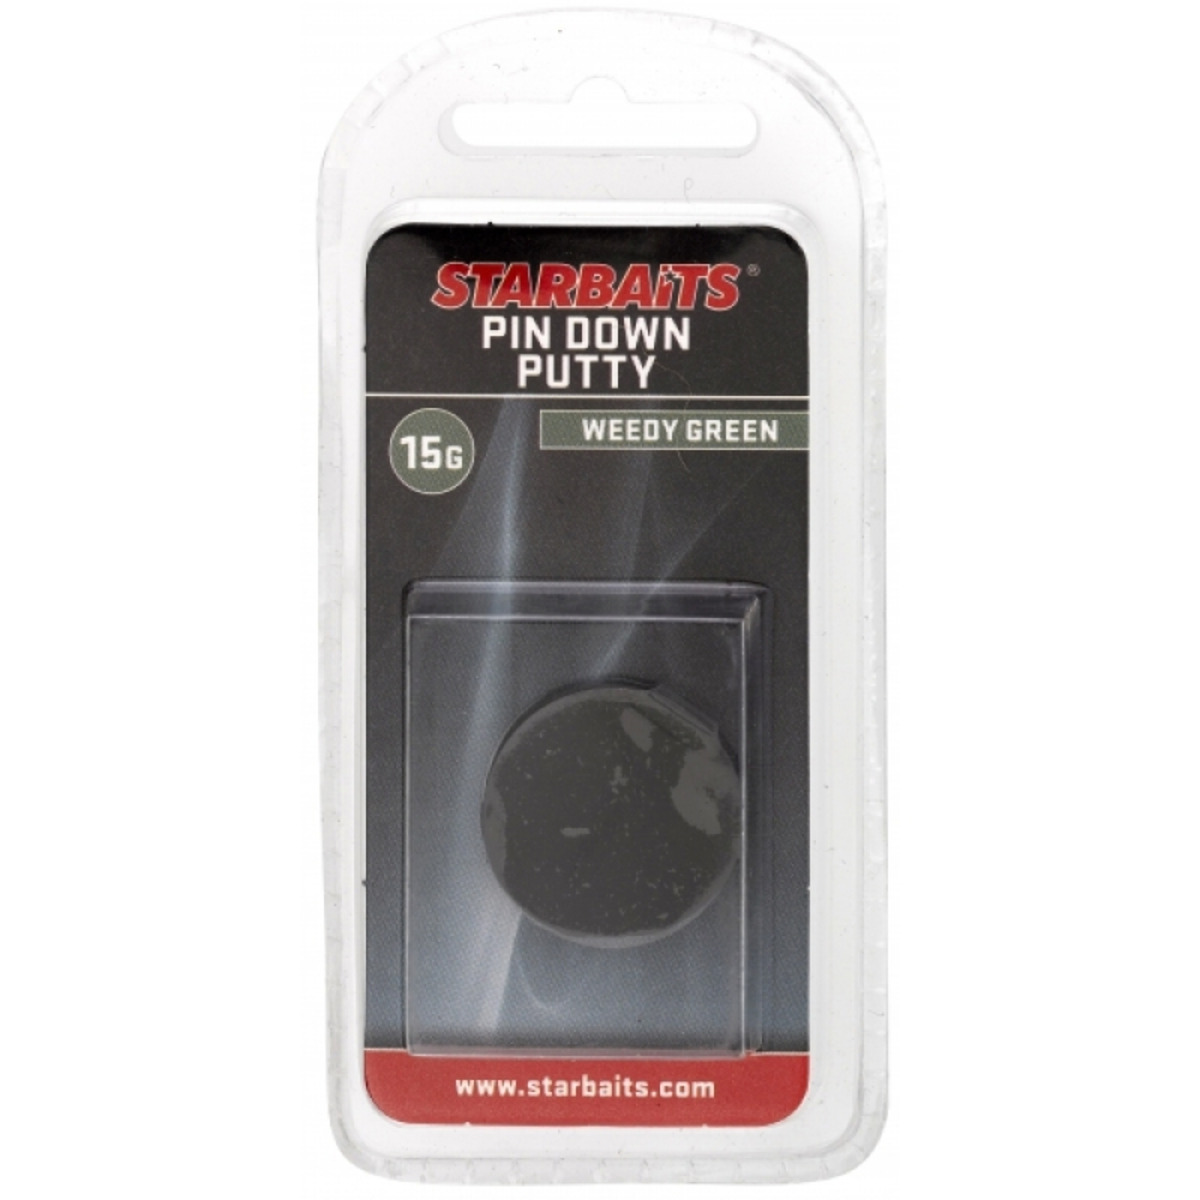 Starbaits Pin Down Putty - WEEDY GREEN 15 g